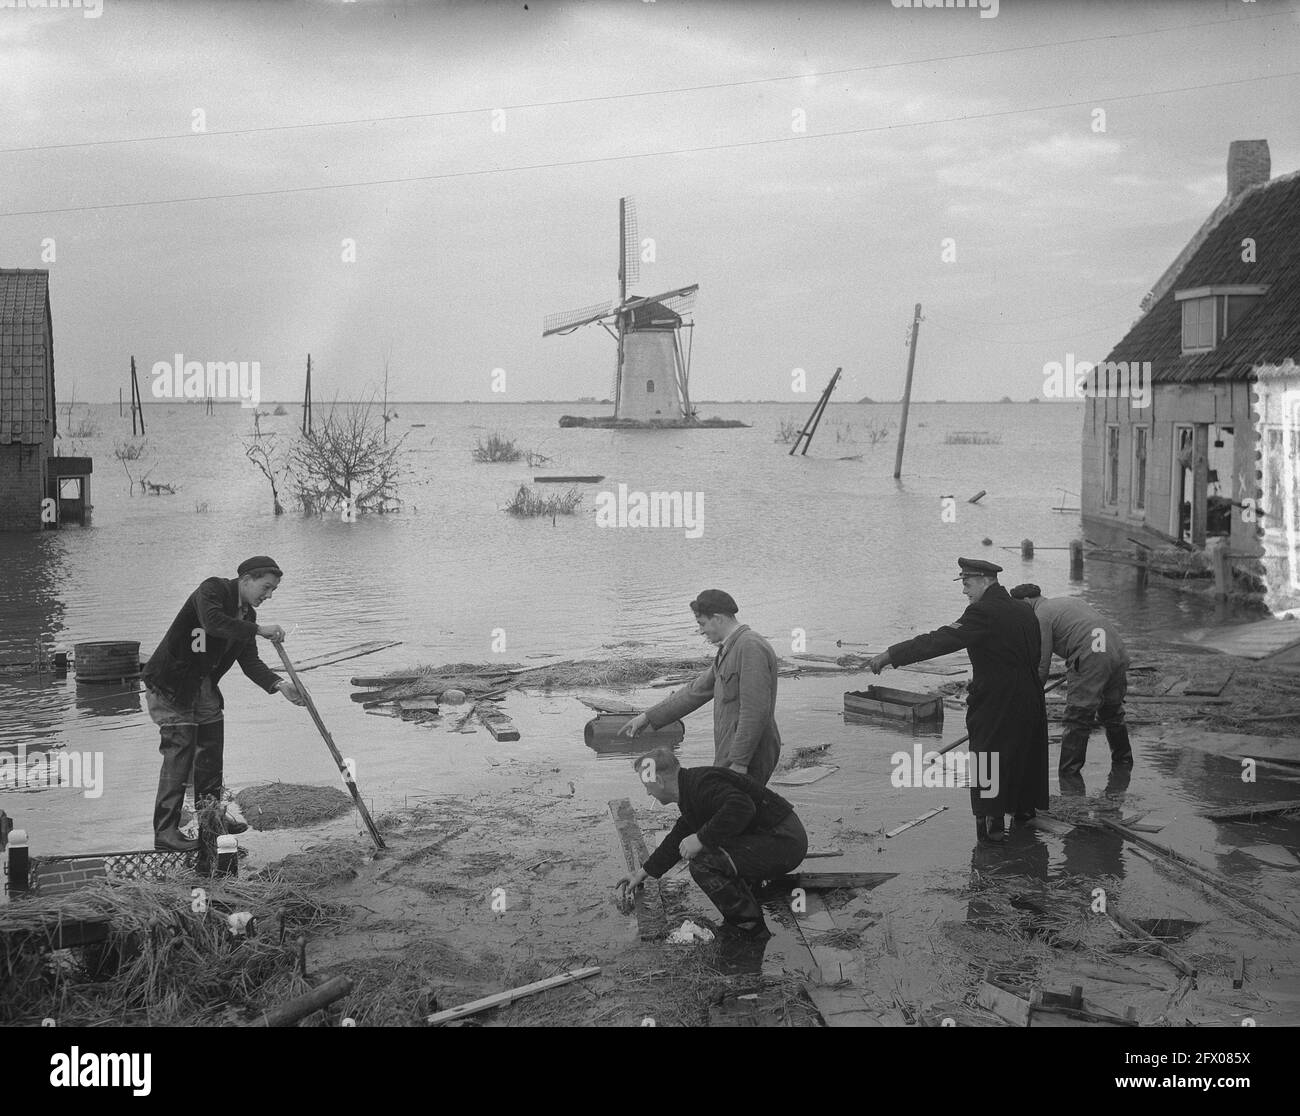 Schouwen Duiveland Nieuwerkerk . Clearance sheets, April 2, 1953, floods, The Netherlands, 20th century press agency photo, news to remember, documentary, historic photography 1945-1990, visual stories, human history of the Twentieth Century, capturing moments in time Stock Photo